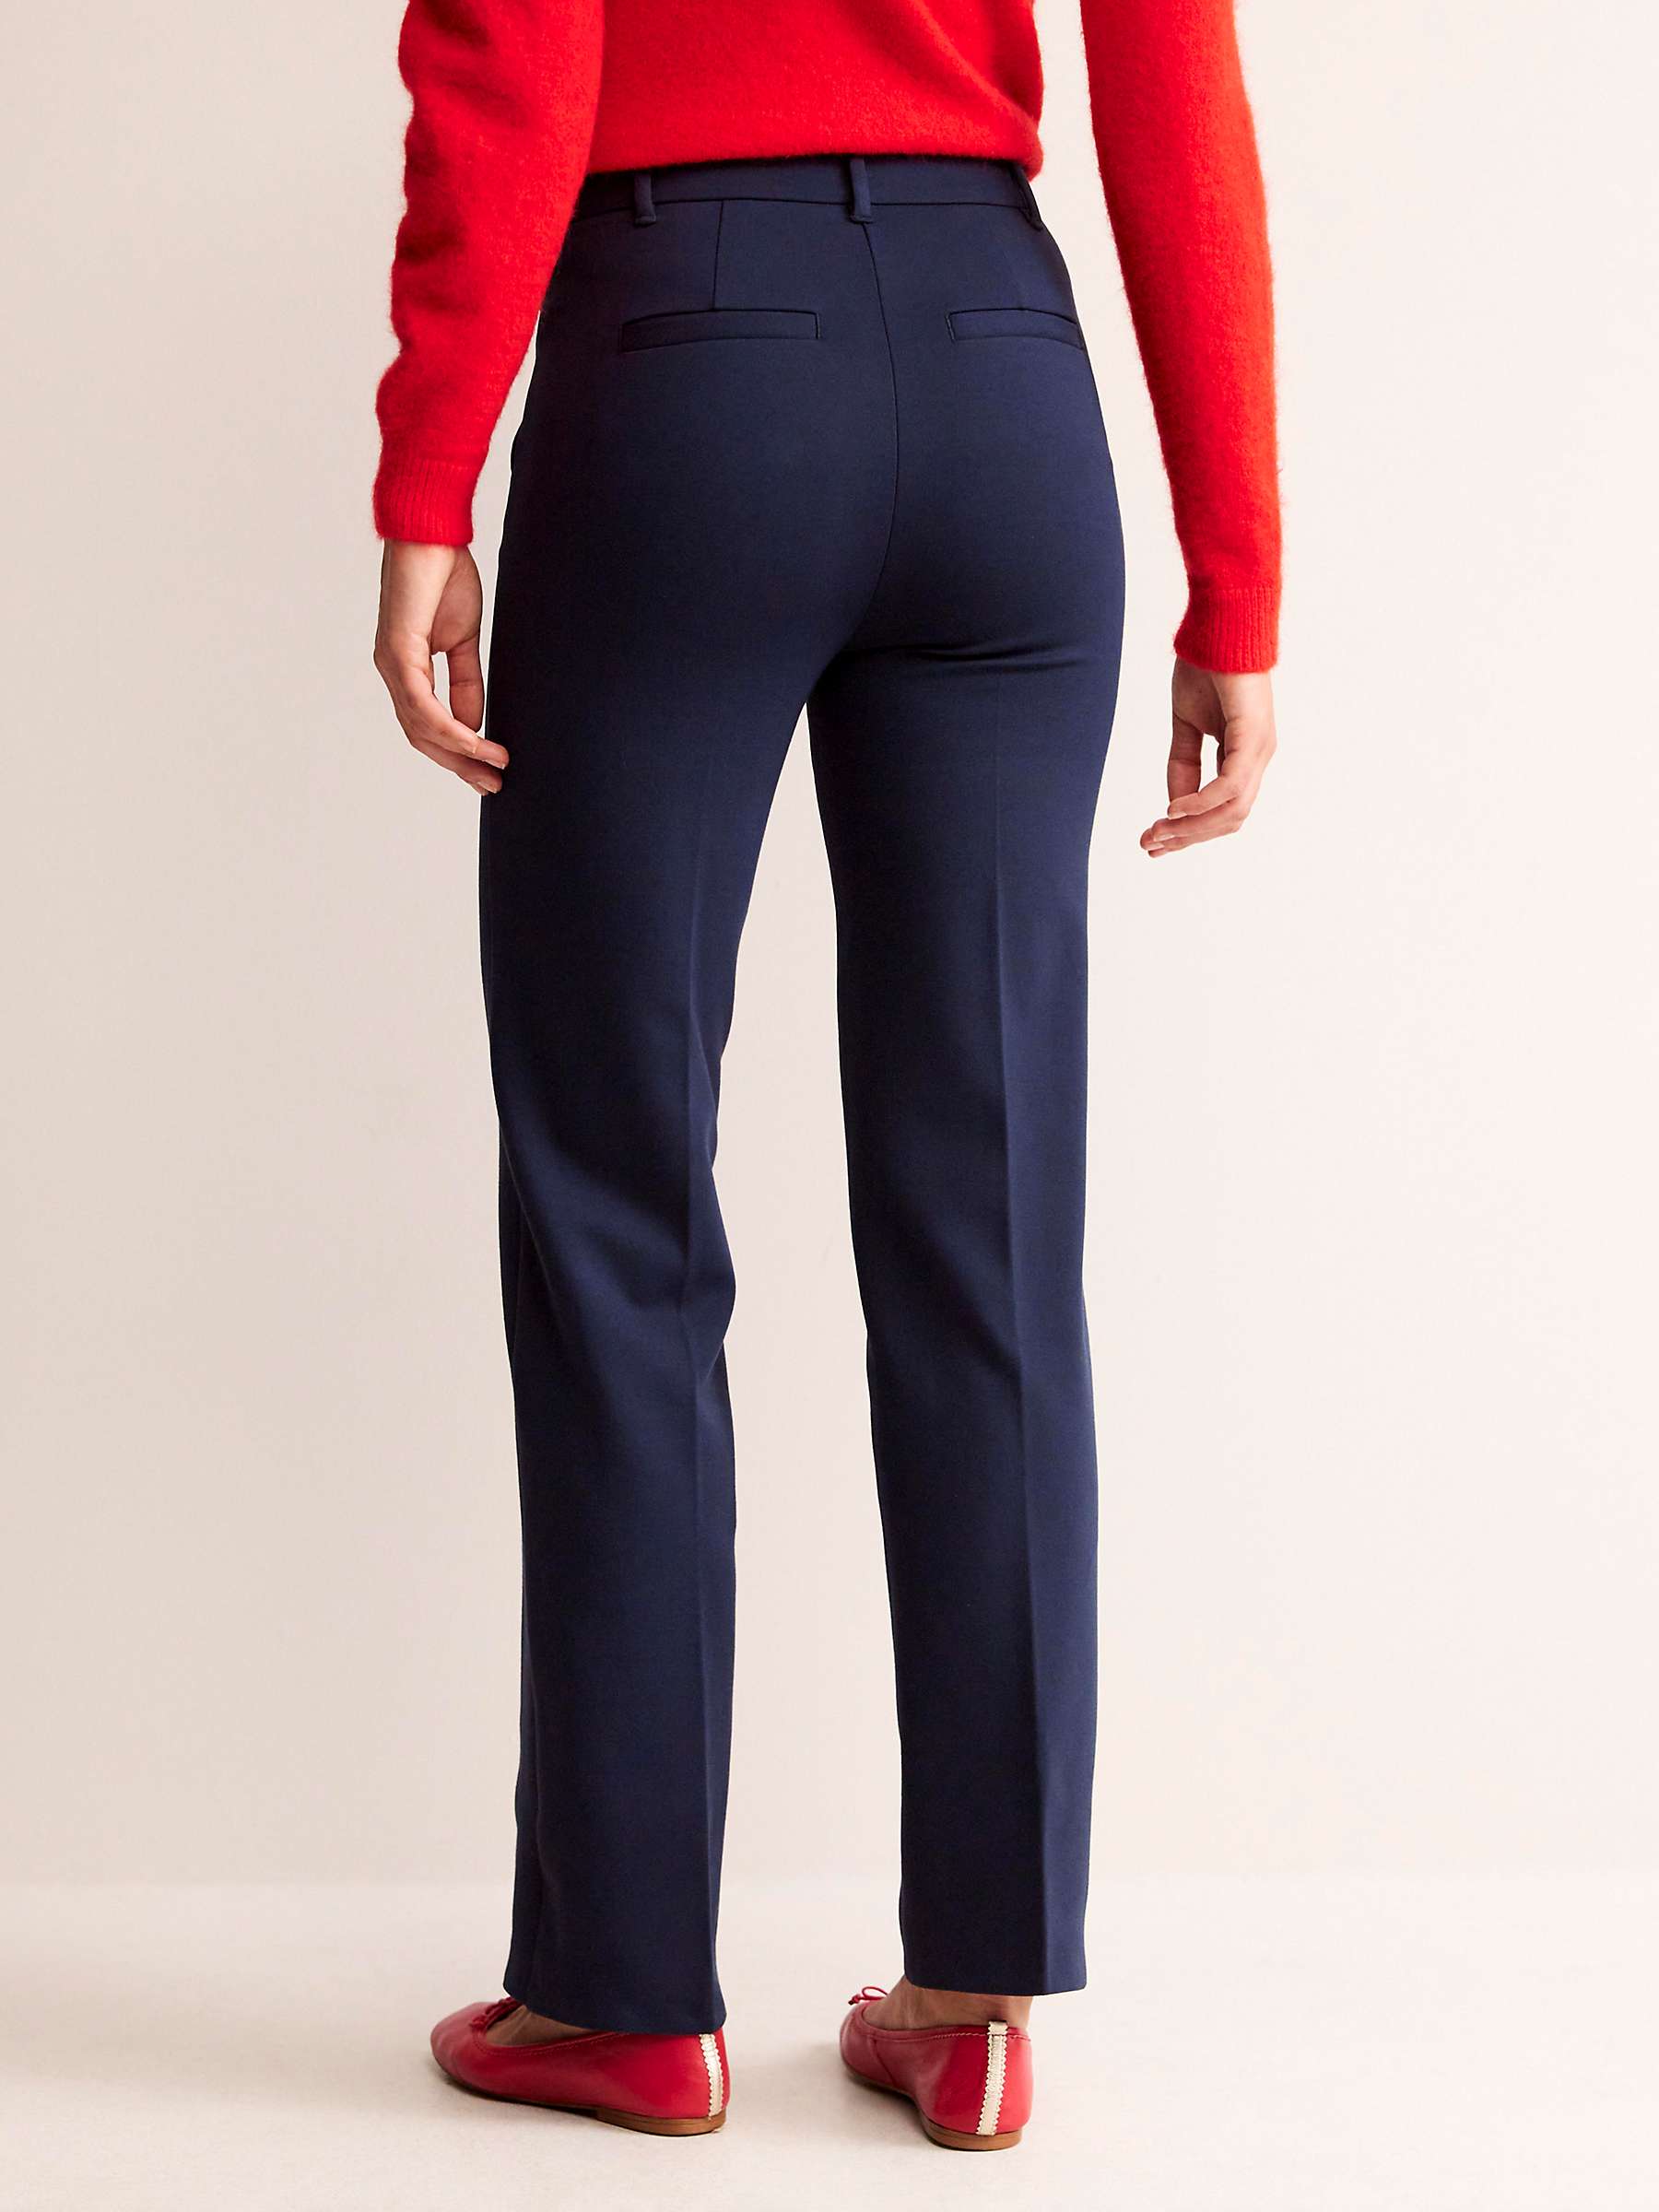 Buy Boden Pimilico Ponte Trousers Online at johnlewis.com